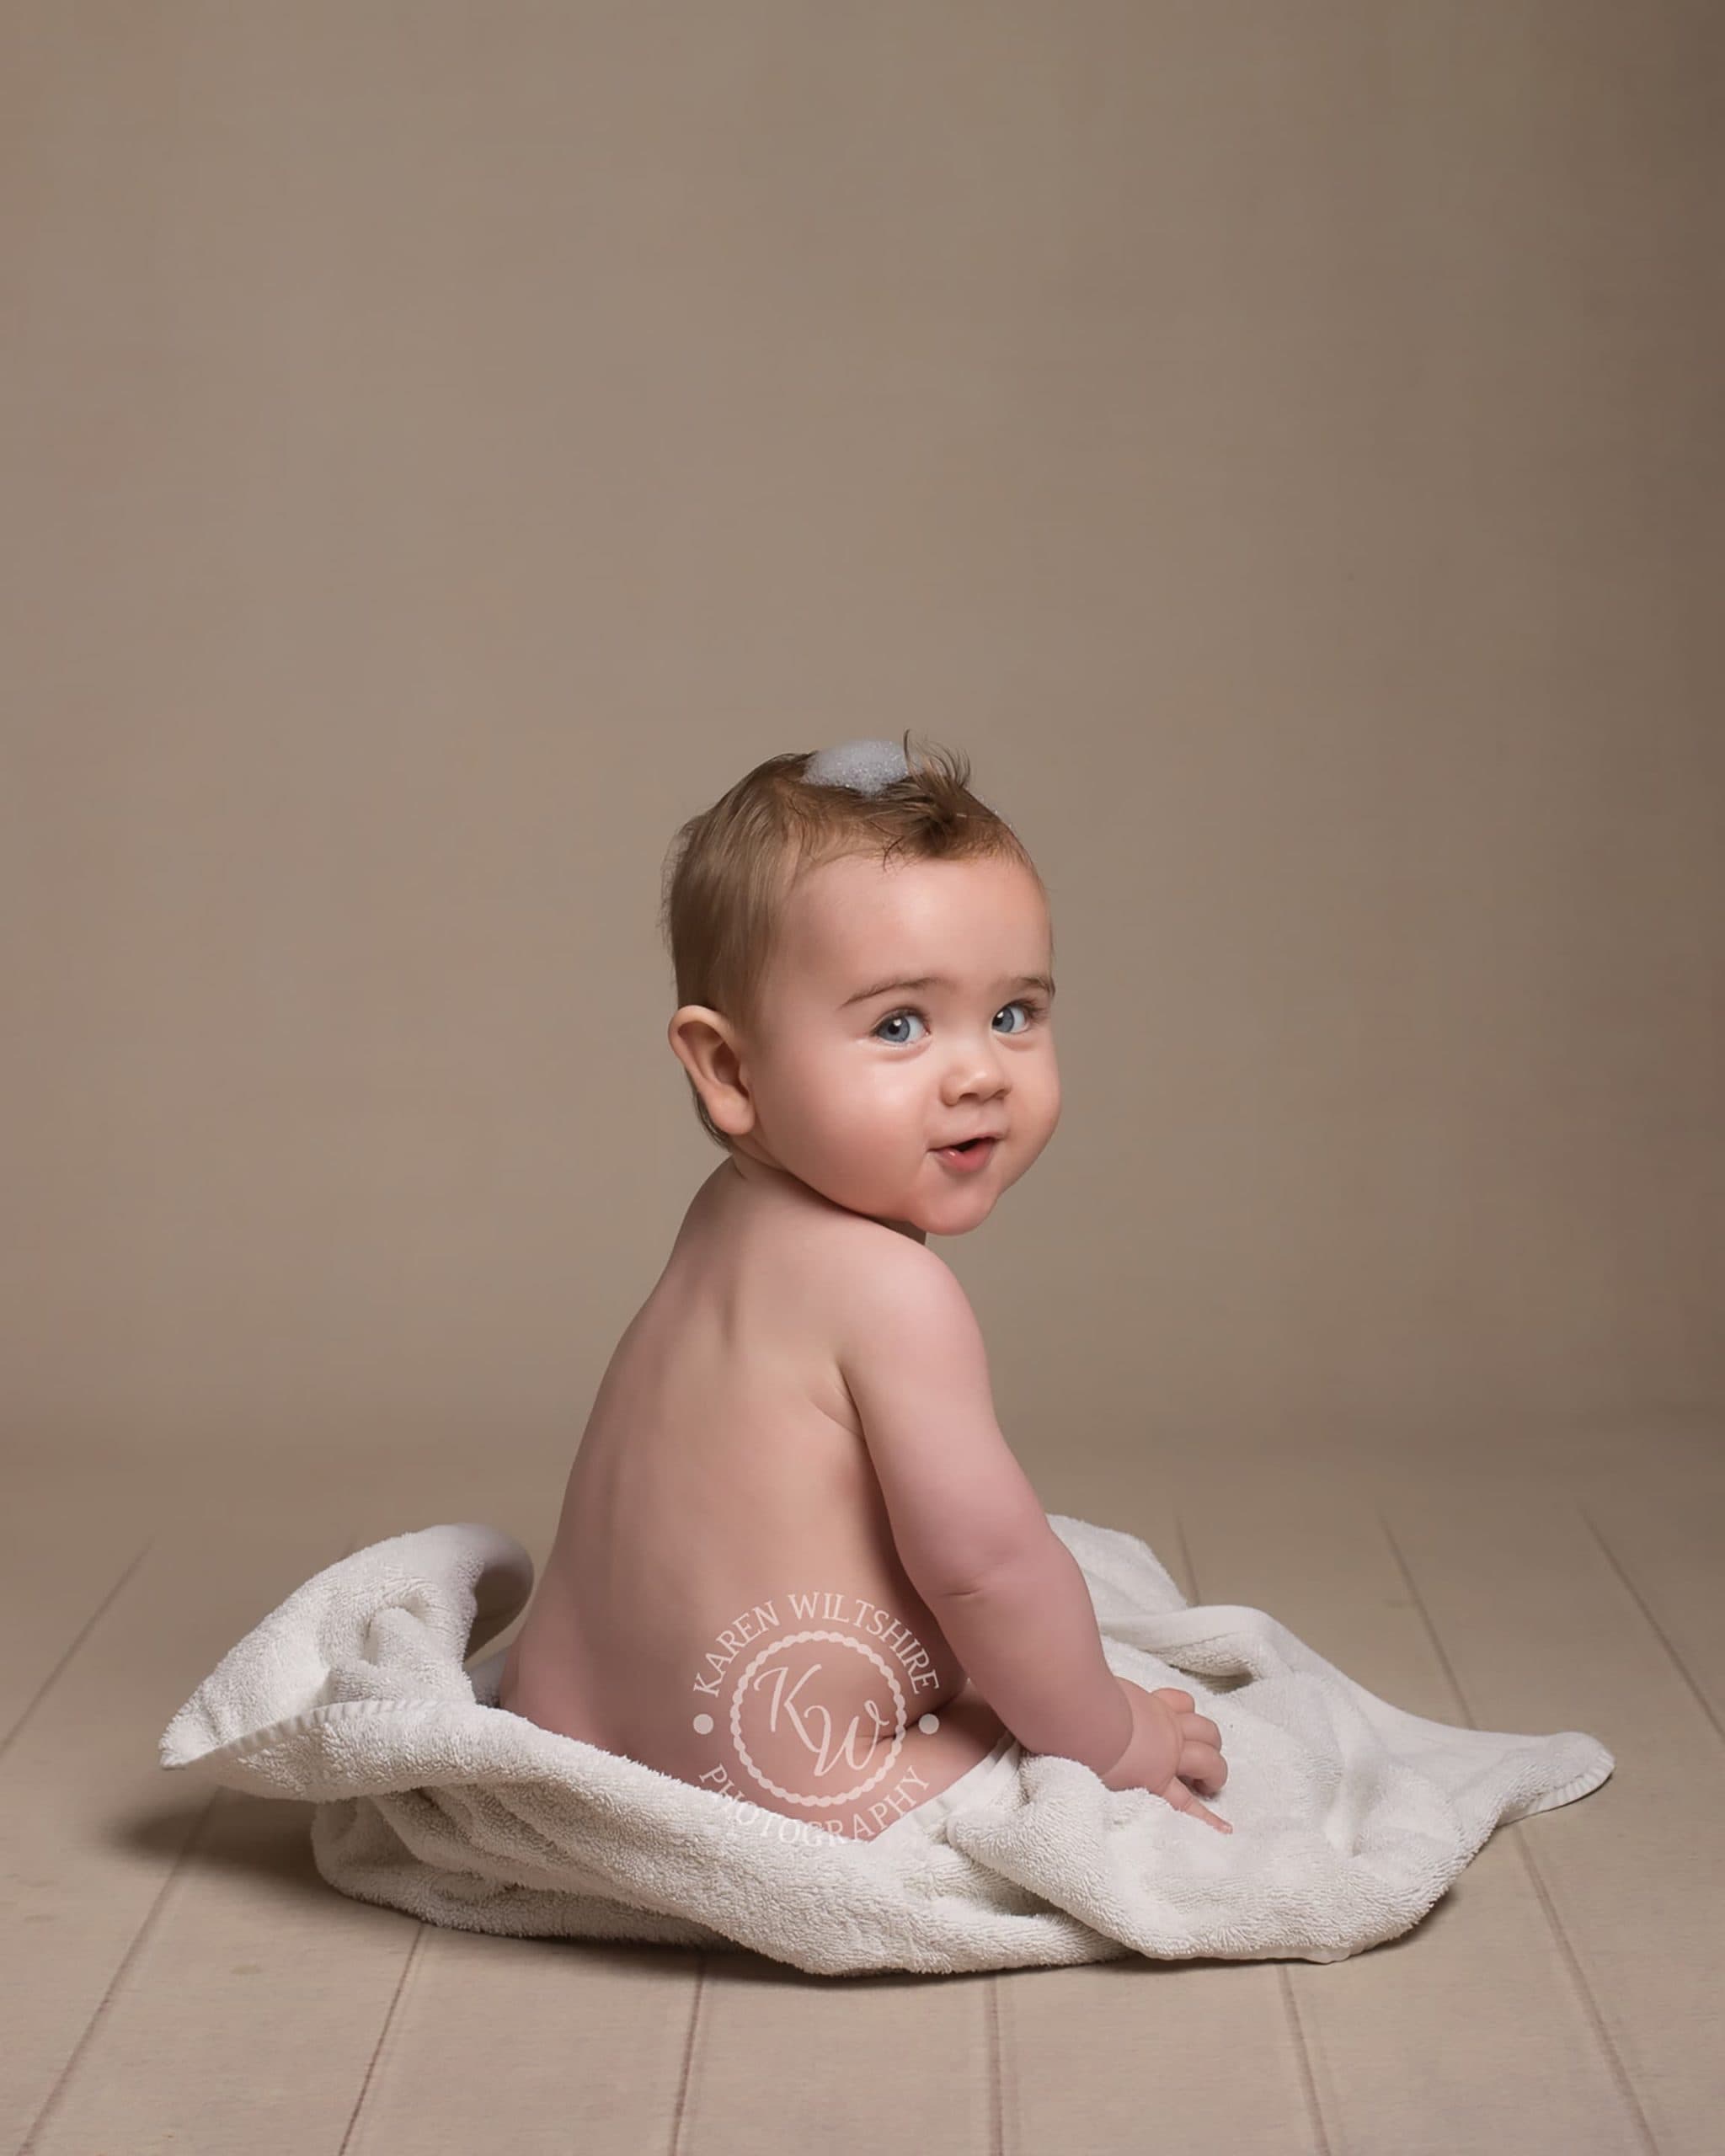 Bare bottomed baby turns to smile at camera